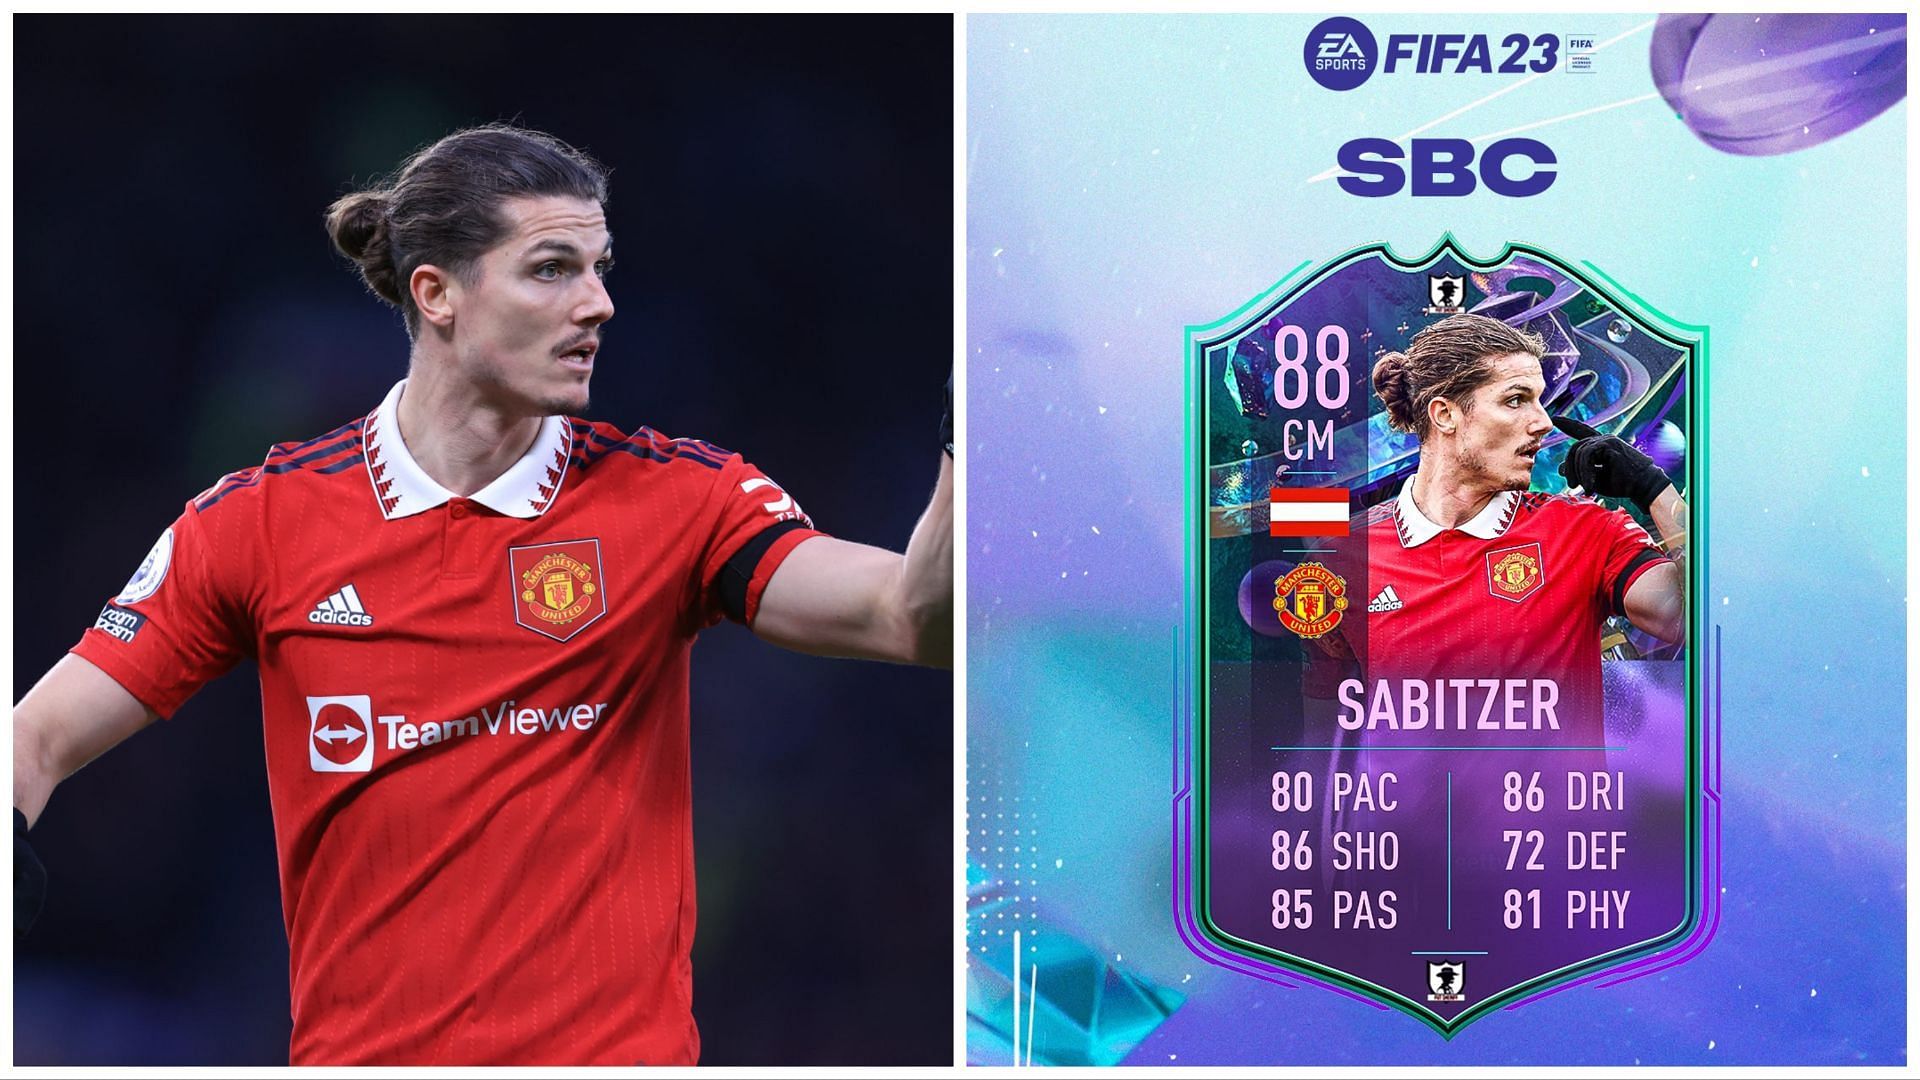 Fantasy FUT Marcel Sabitzer has been leaked (Images via Getty and Twitter/FUT Sheriff)